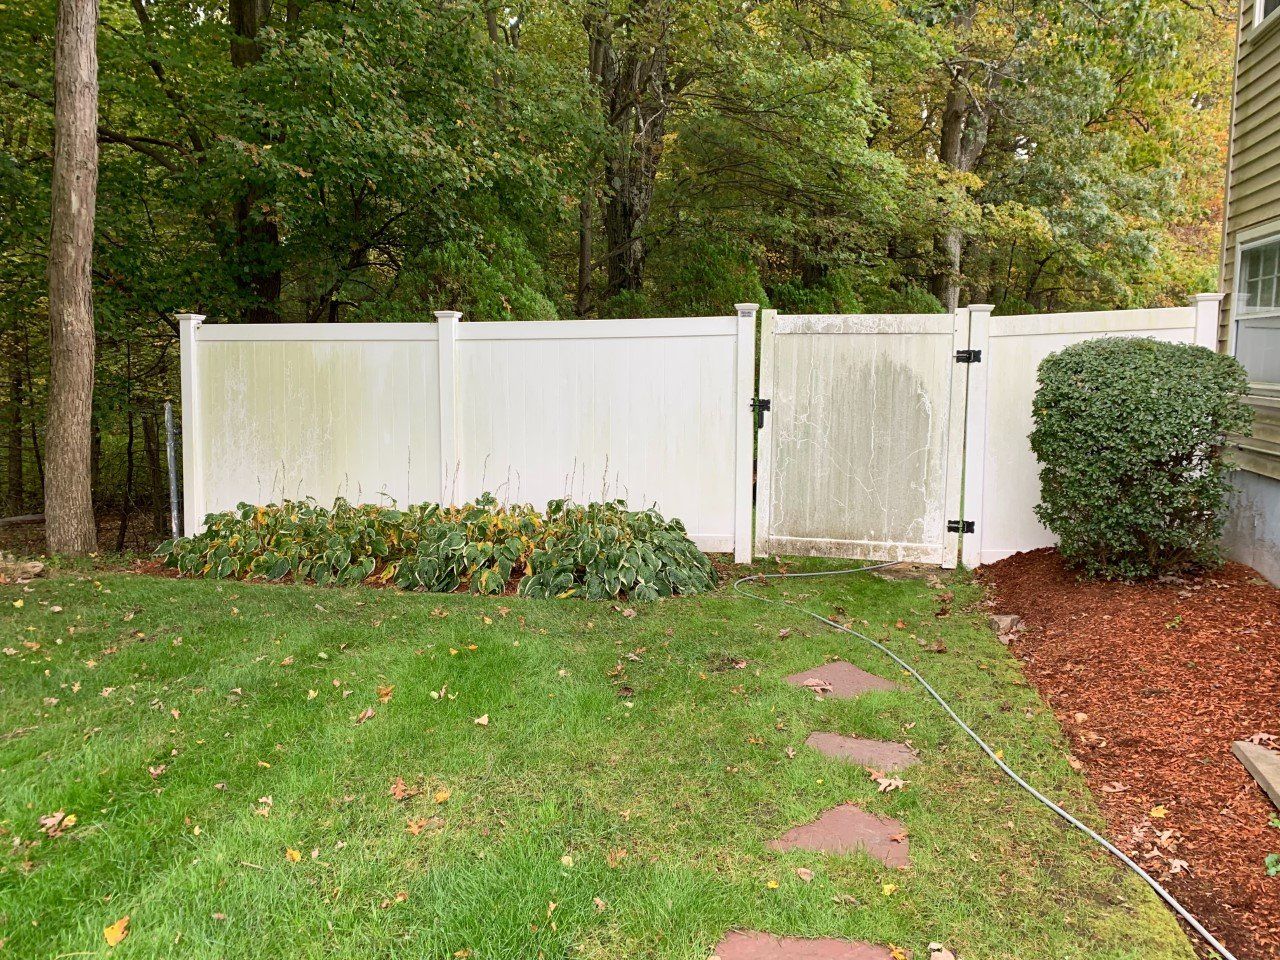 Vinyl Fence Cleaning — Fences So Clean You'll Think They're Brand New